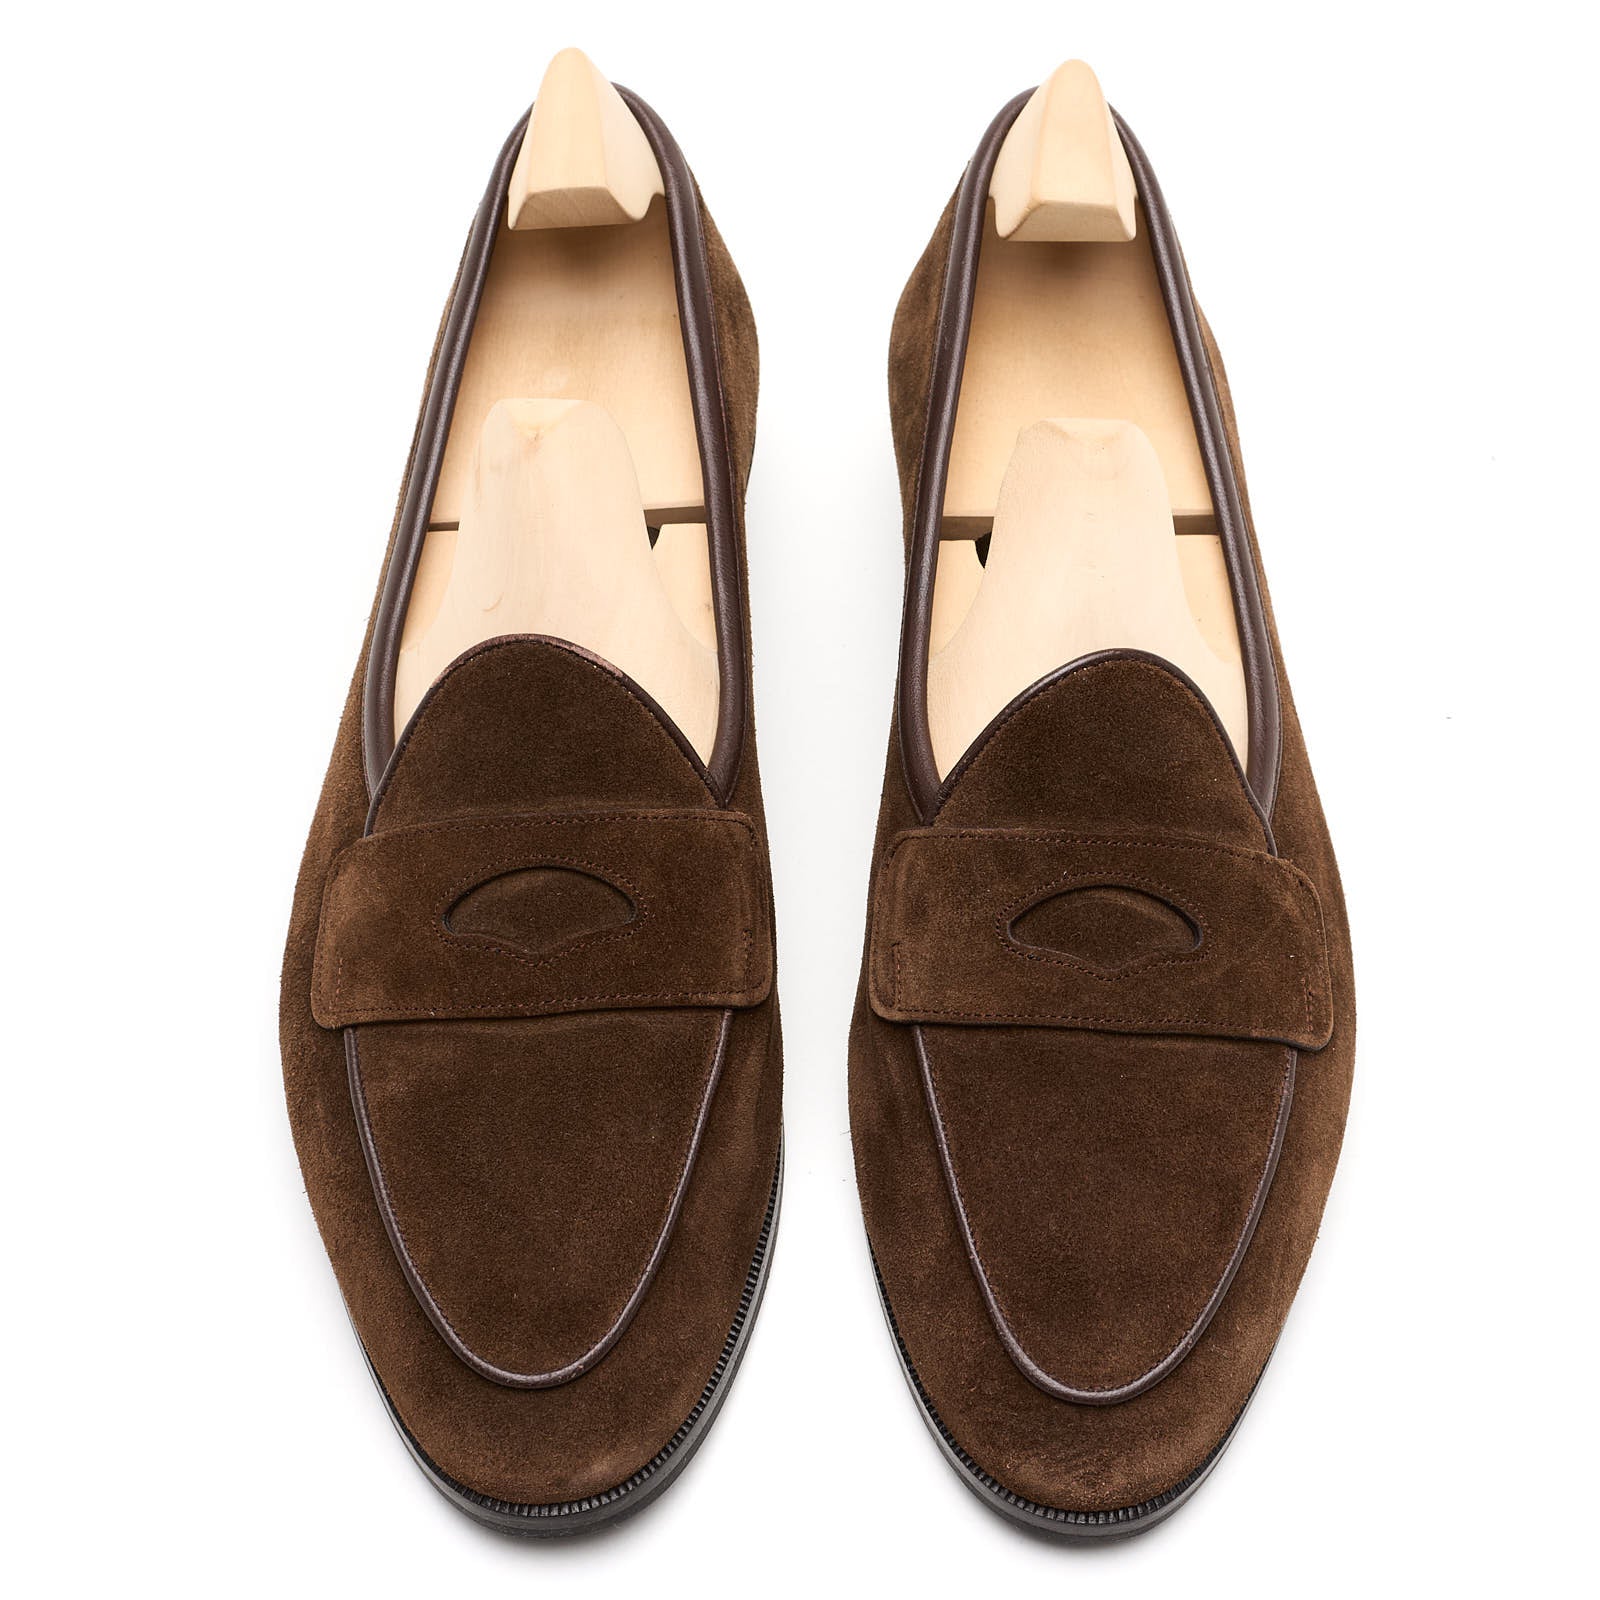 BAUDOIN & LANGE Grand Fenelon Brown Suede Leather Penny Loafers EU 41 NEW US 8